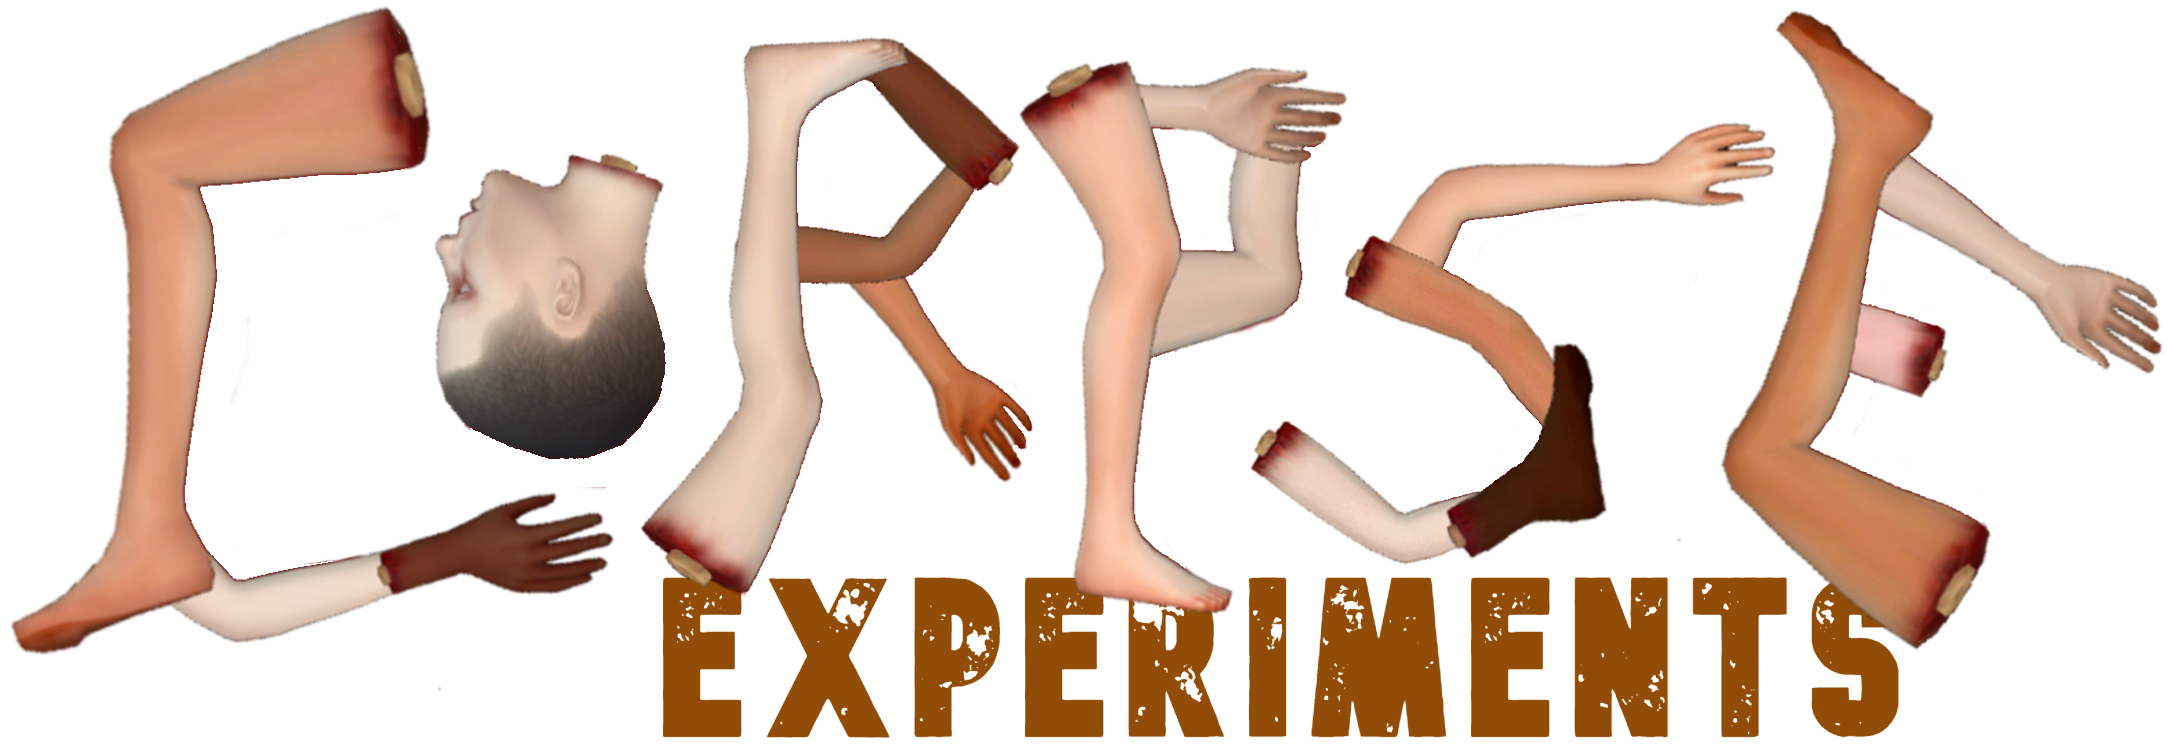 Corpse Experiments - Downloads - The Sims 4